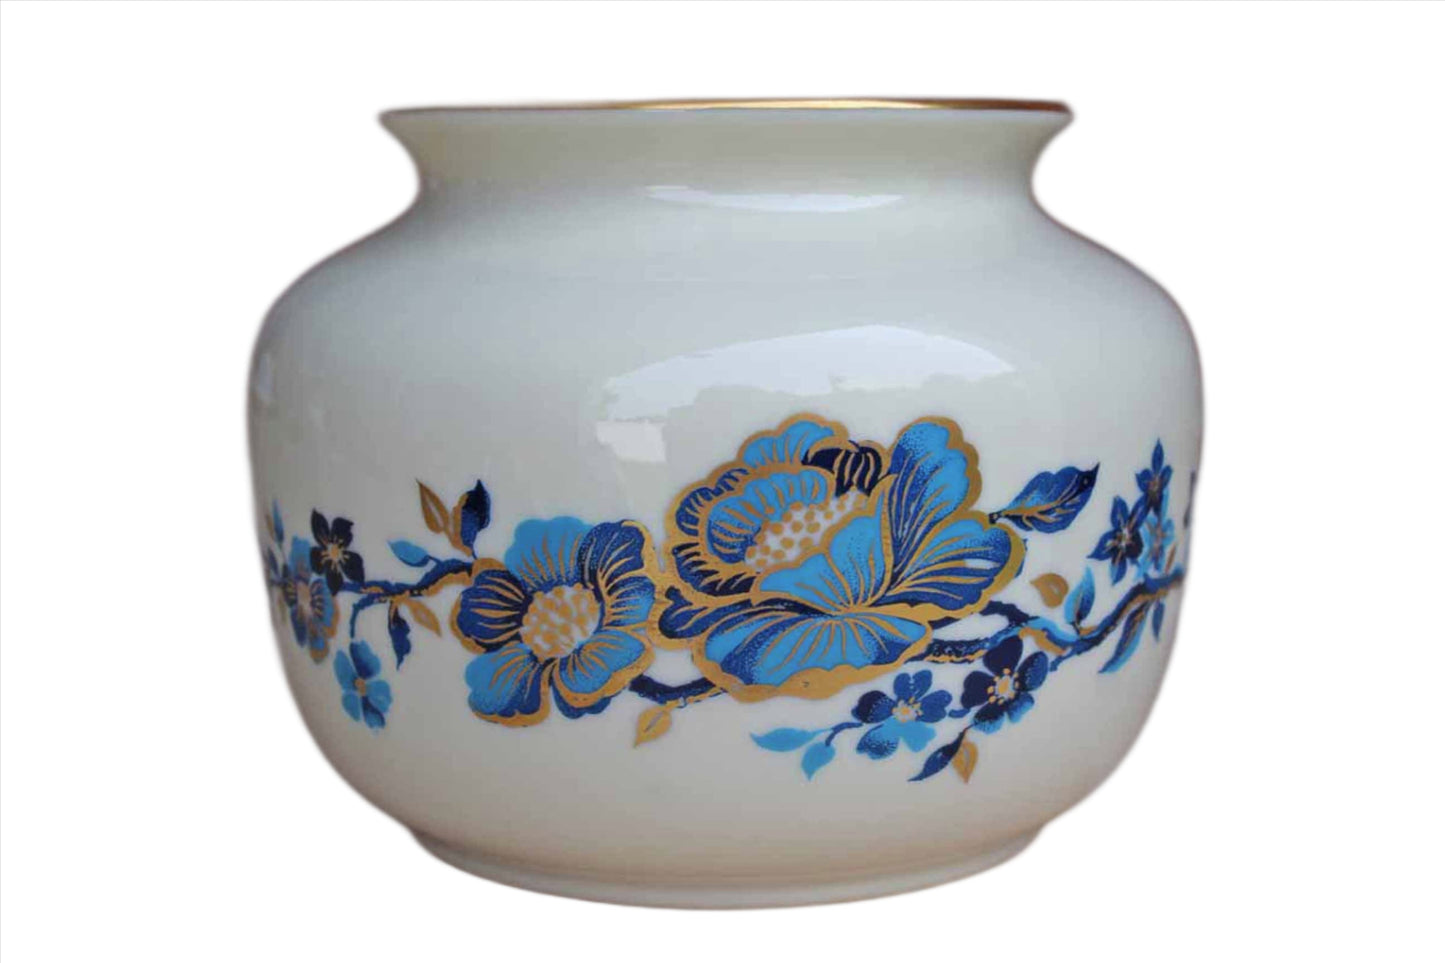 Lenox (USA) Pagoda Vase with Blue and Gold Flowers